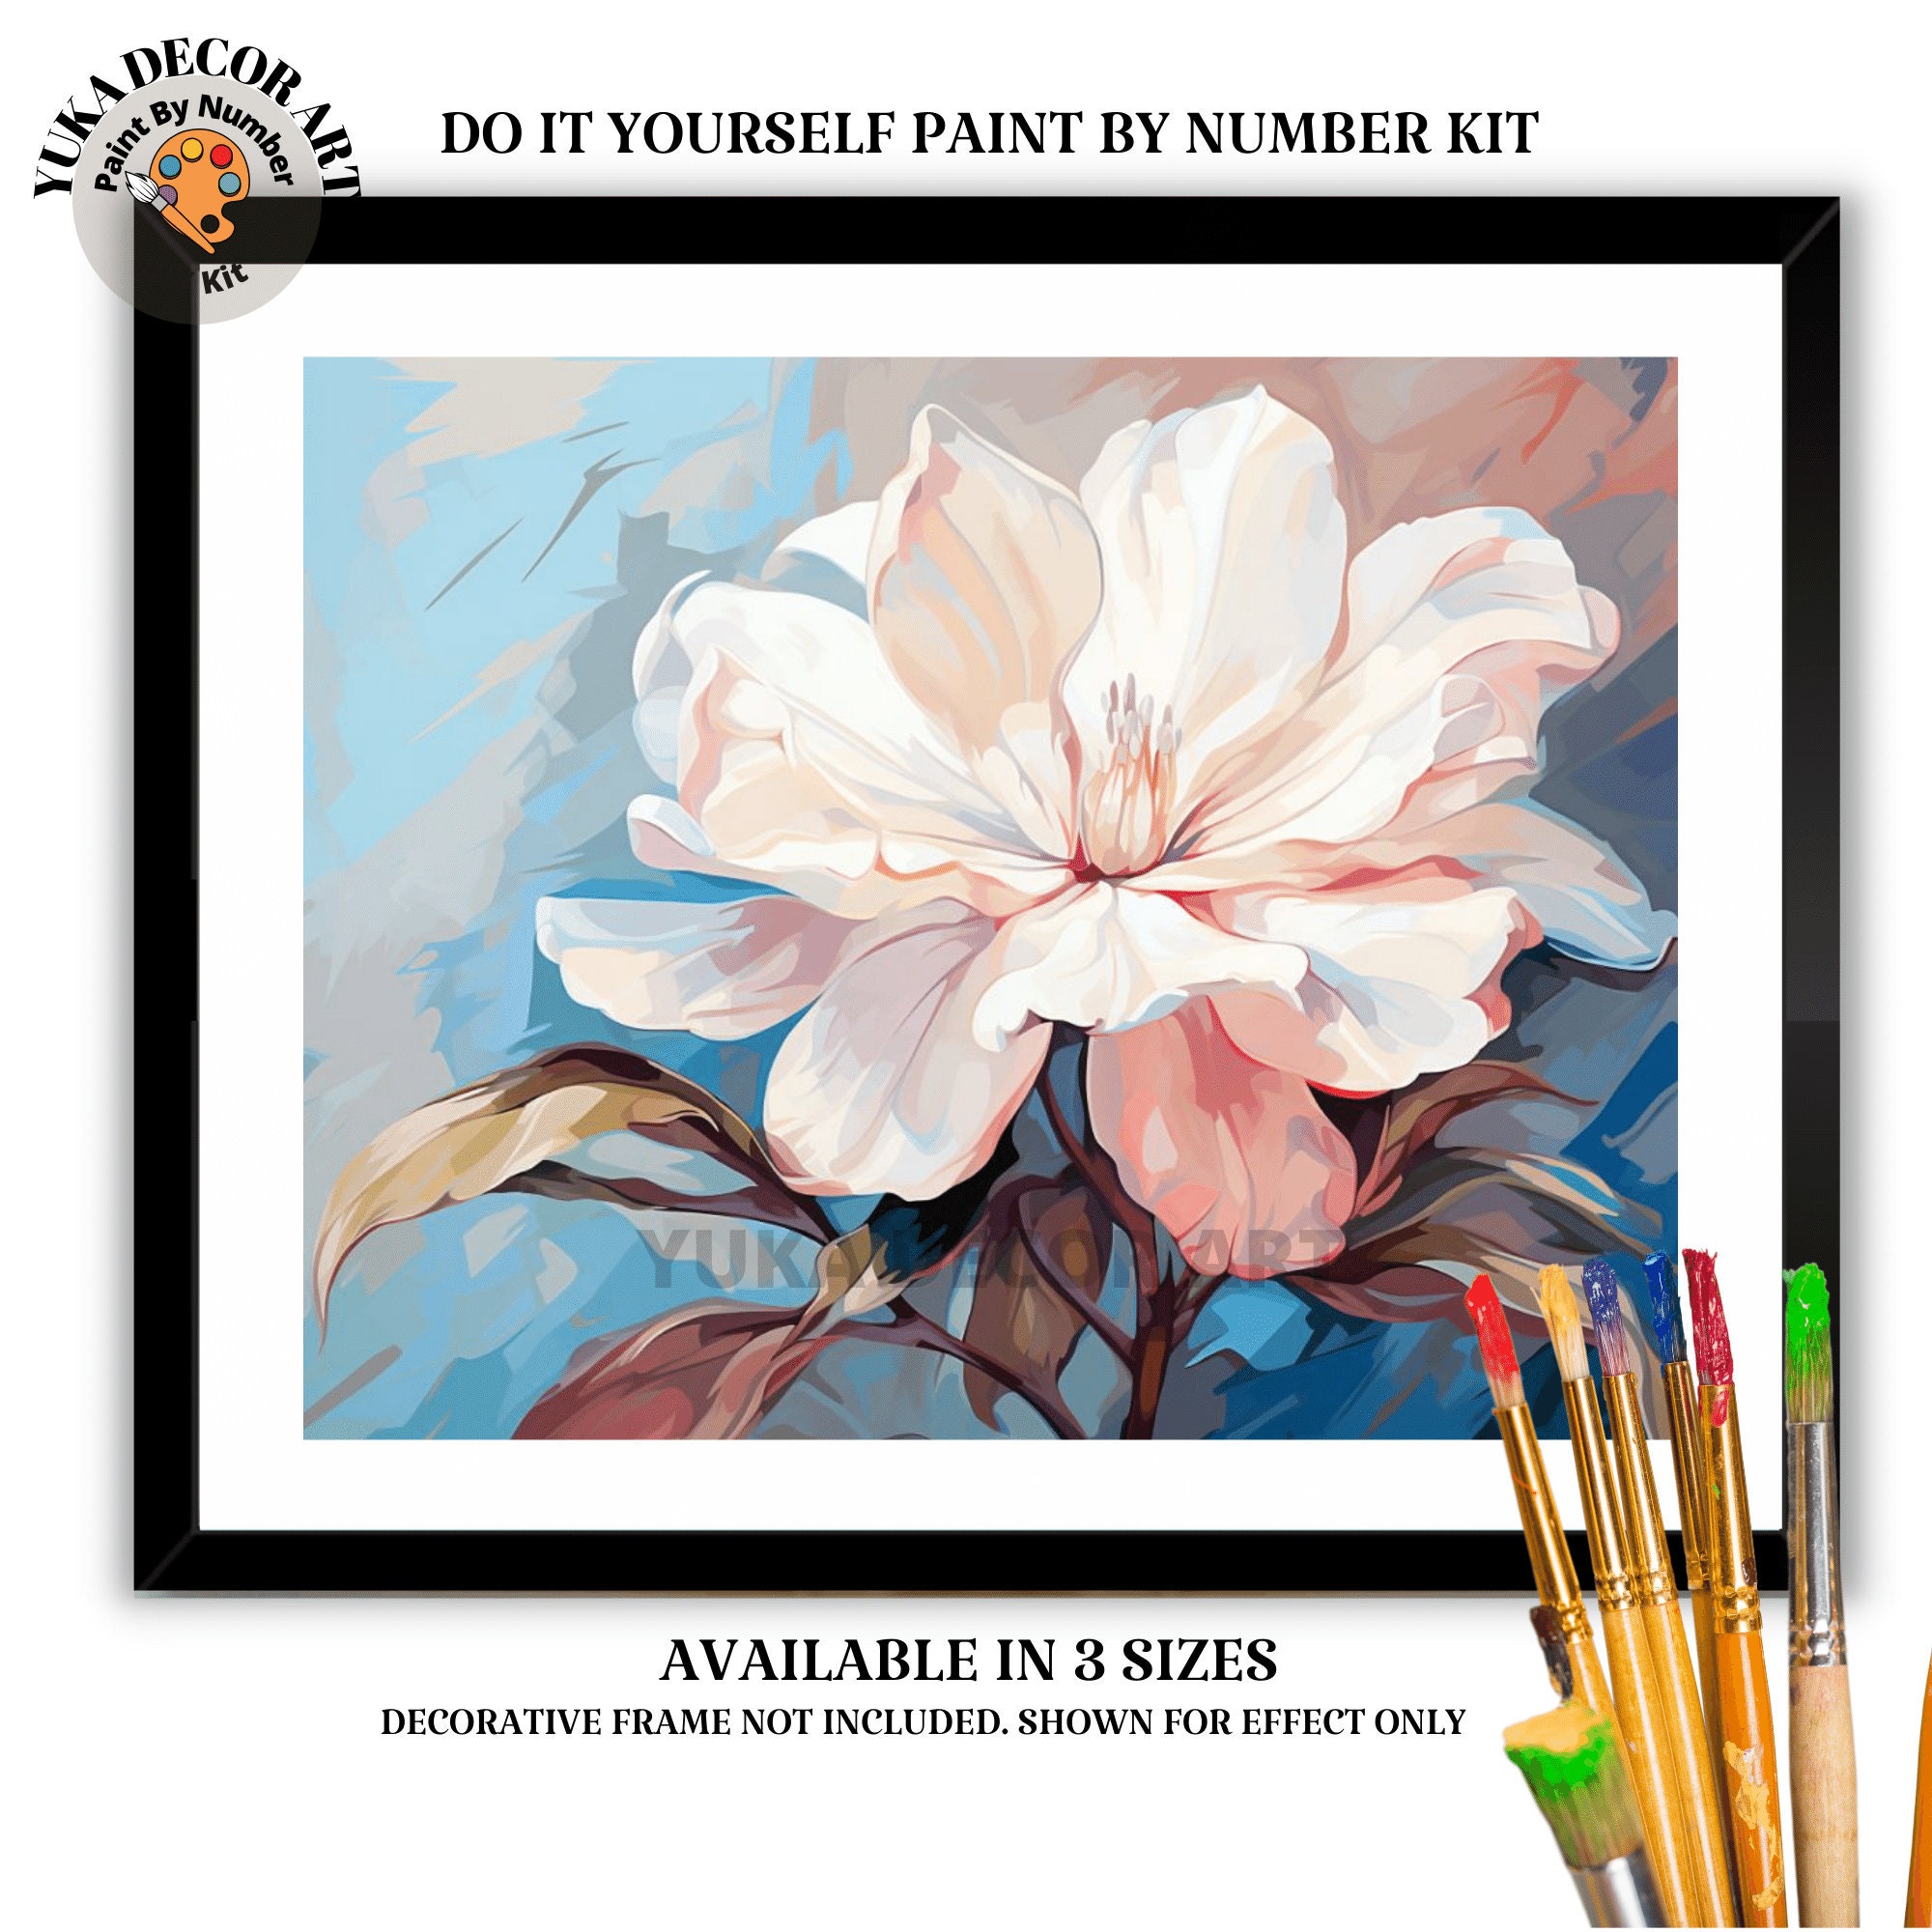 Boho Modern PAINT by NUMBER Kit for Adults Garden Flowers DIY 